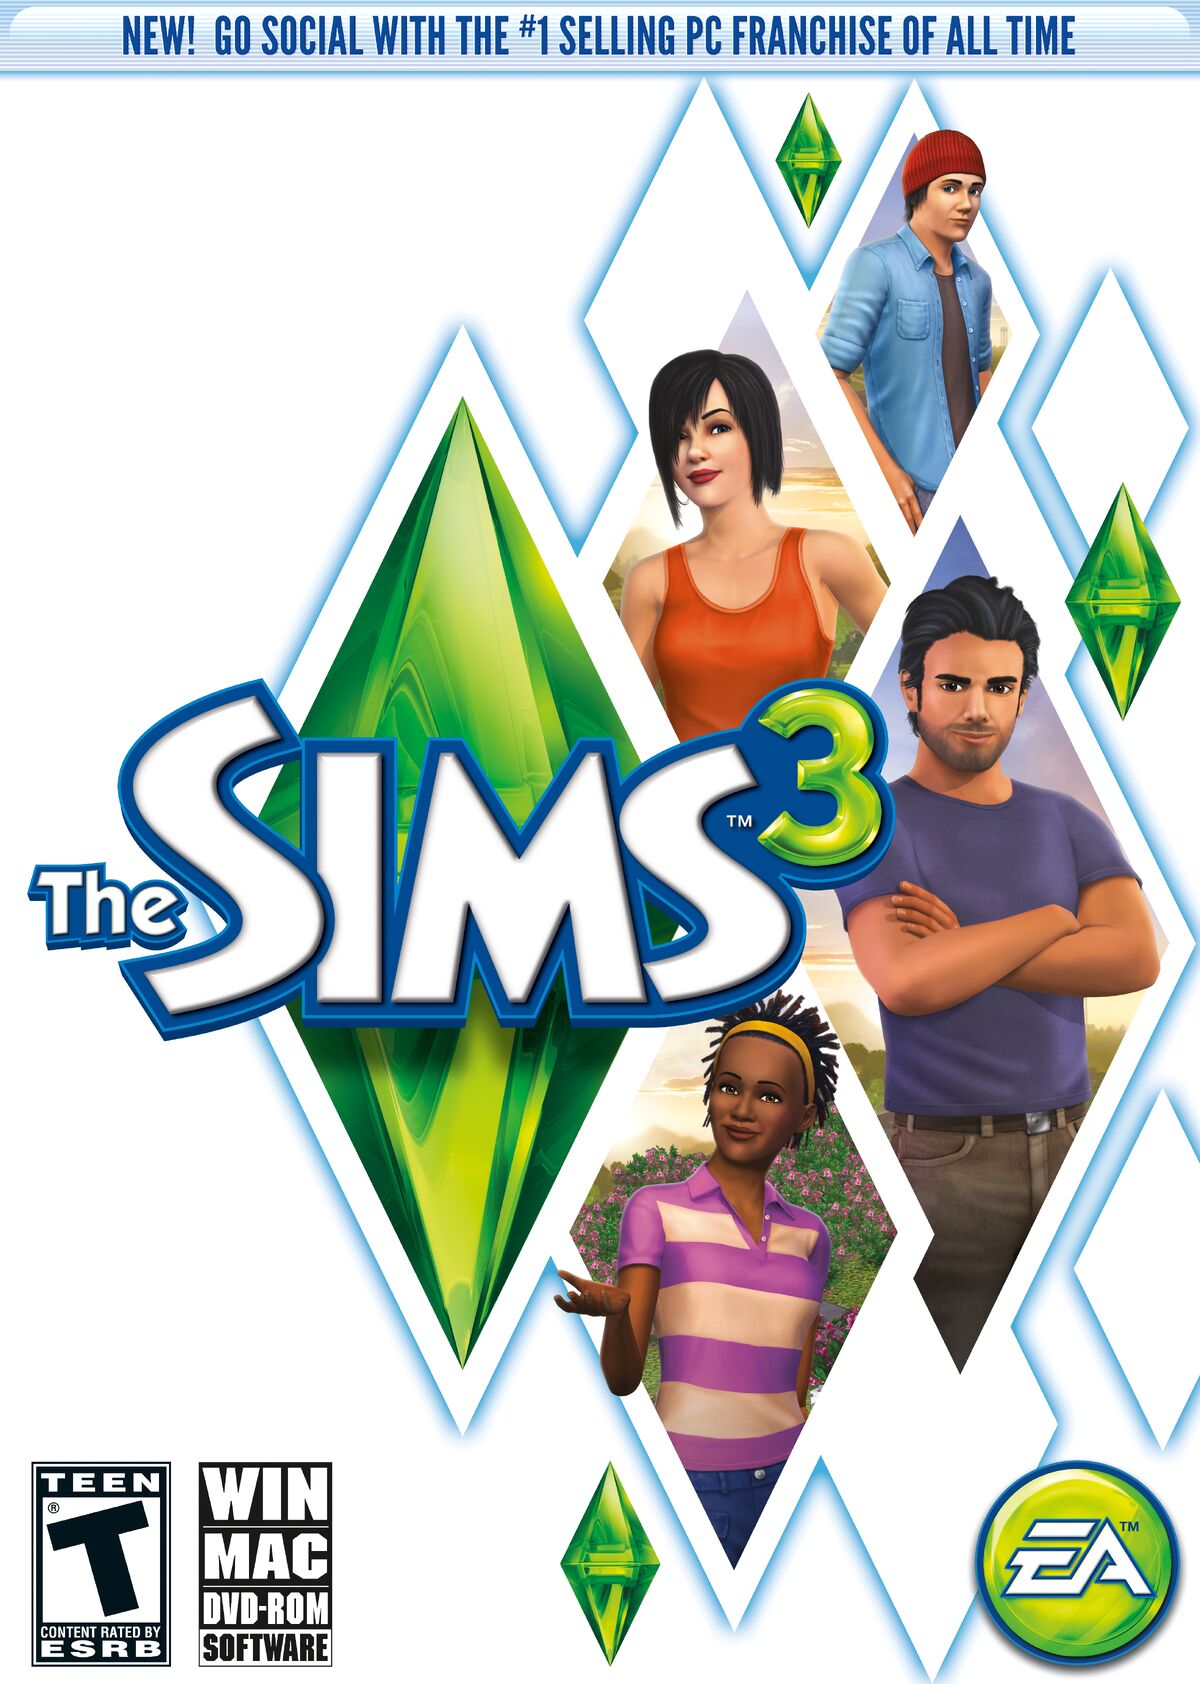 The Sims 3 | The Sims Wiki | Fandom